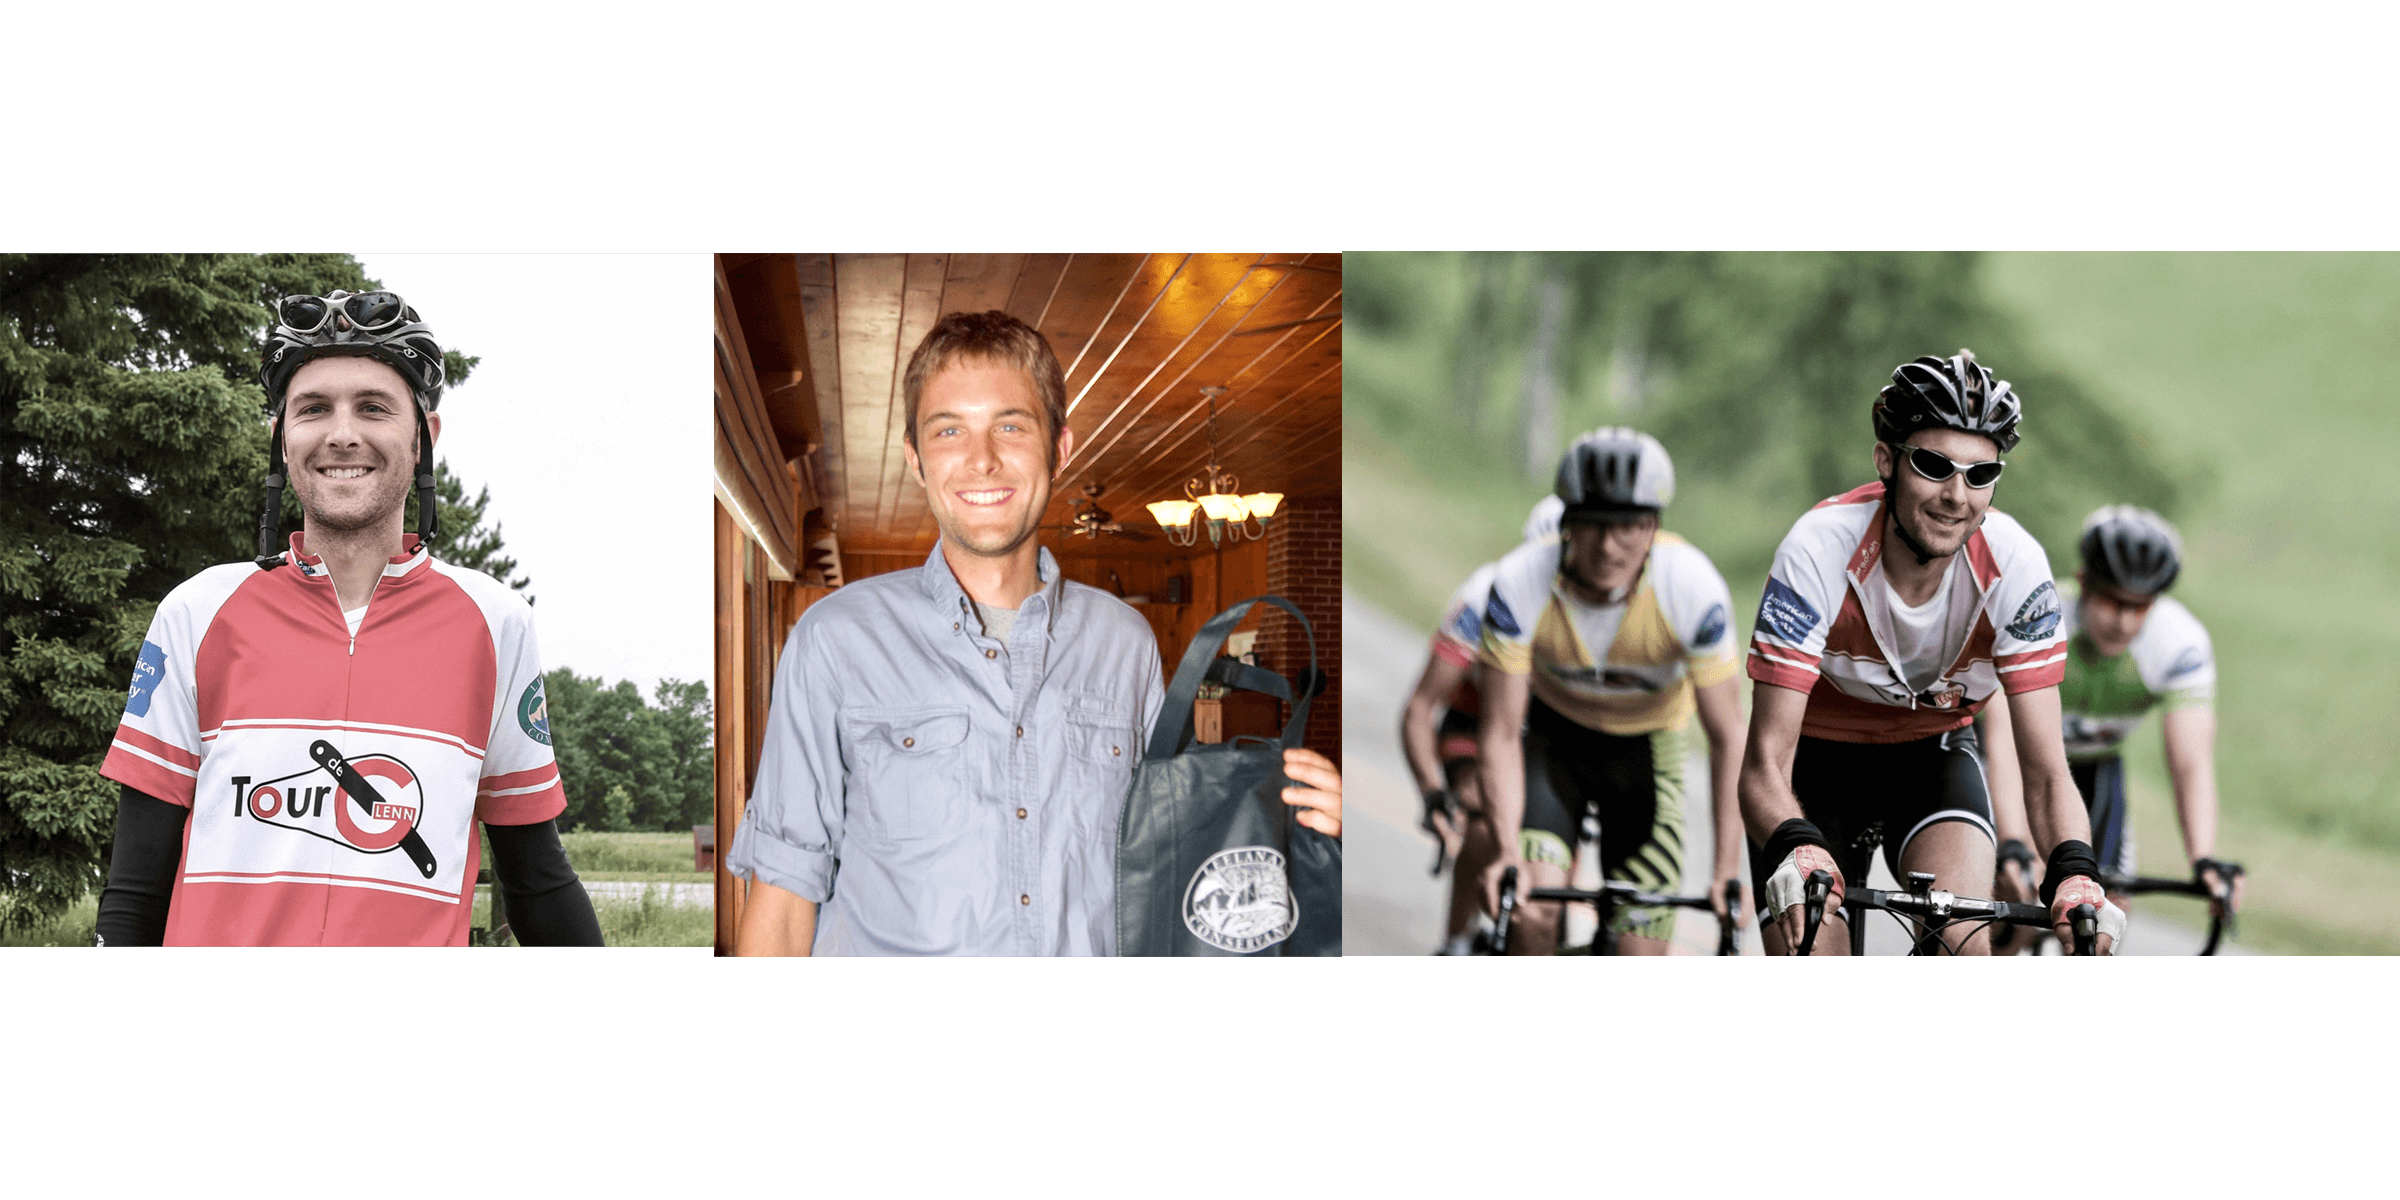 Three photos of Marc VanOtteren, a tall young man with sandy blond hair, wearing a cycling jersey, in casual clothes, and riding a road bike with friends.